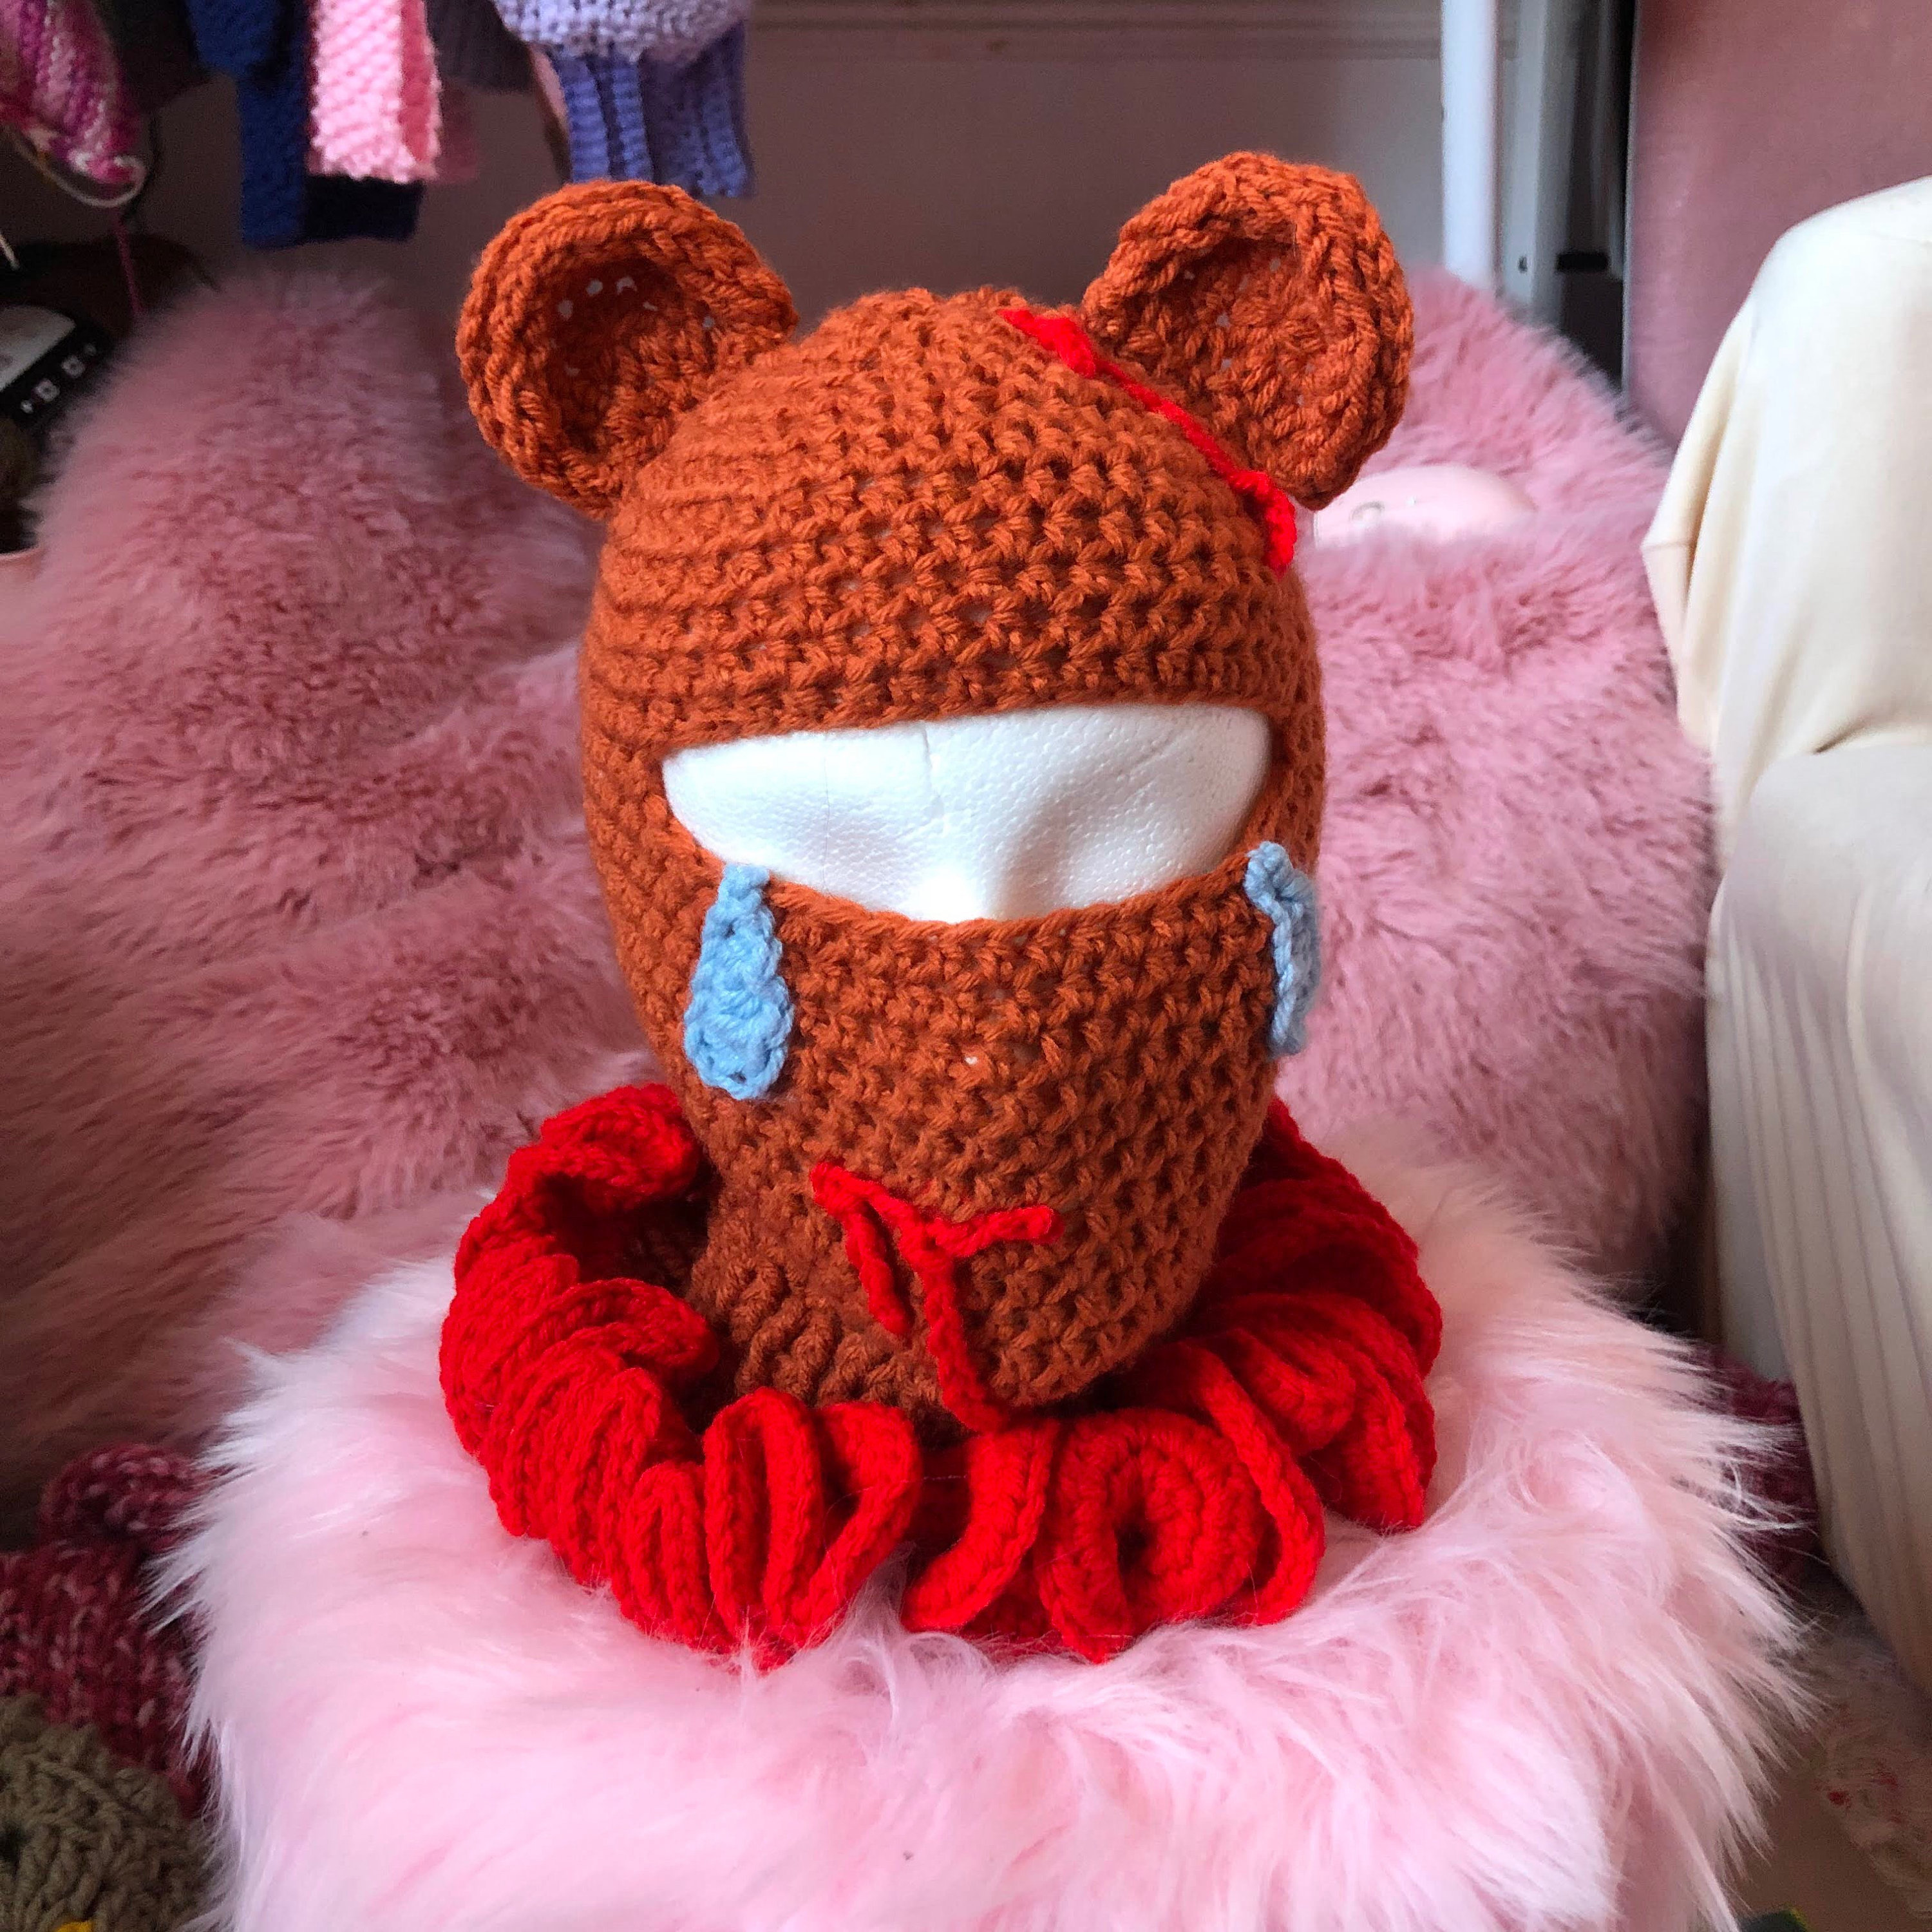 Plush Big Cat Ears Embroidery Cap Balaclava With Ears Full Face Cover Ski  Mask Hats Red Clown Nose Beanies Bonnet Hat Winter Cap